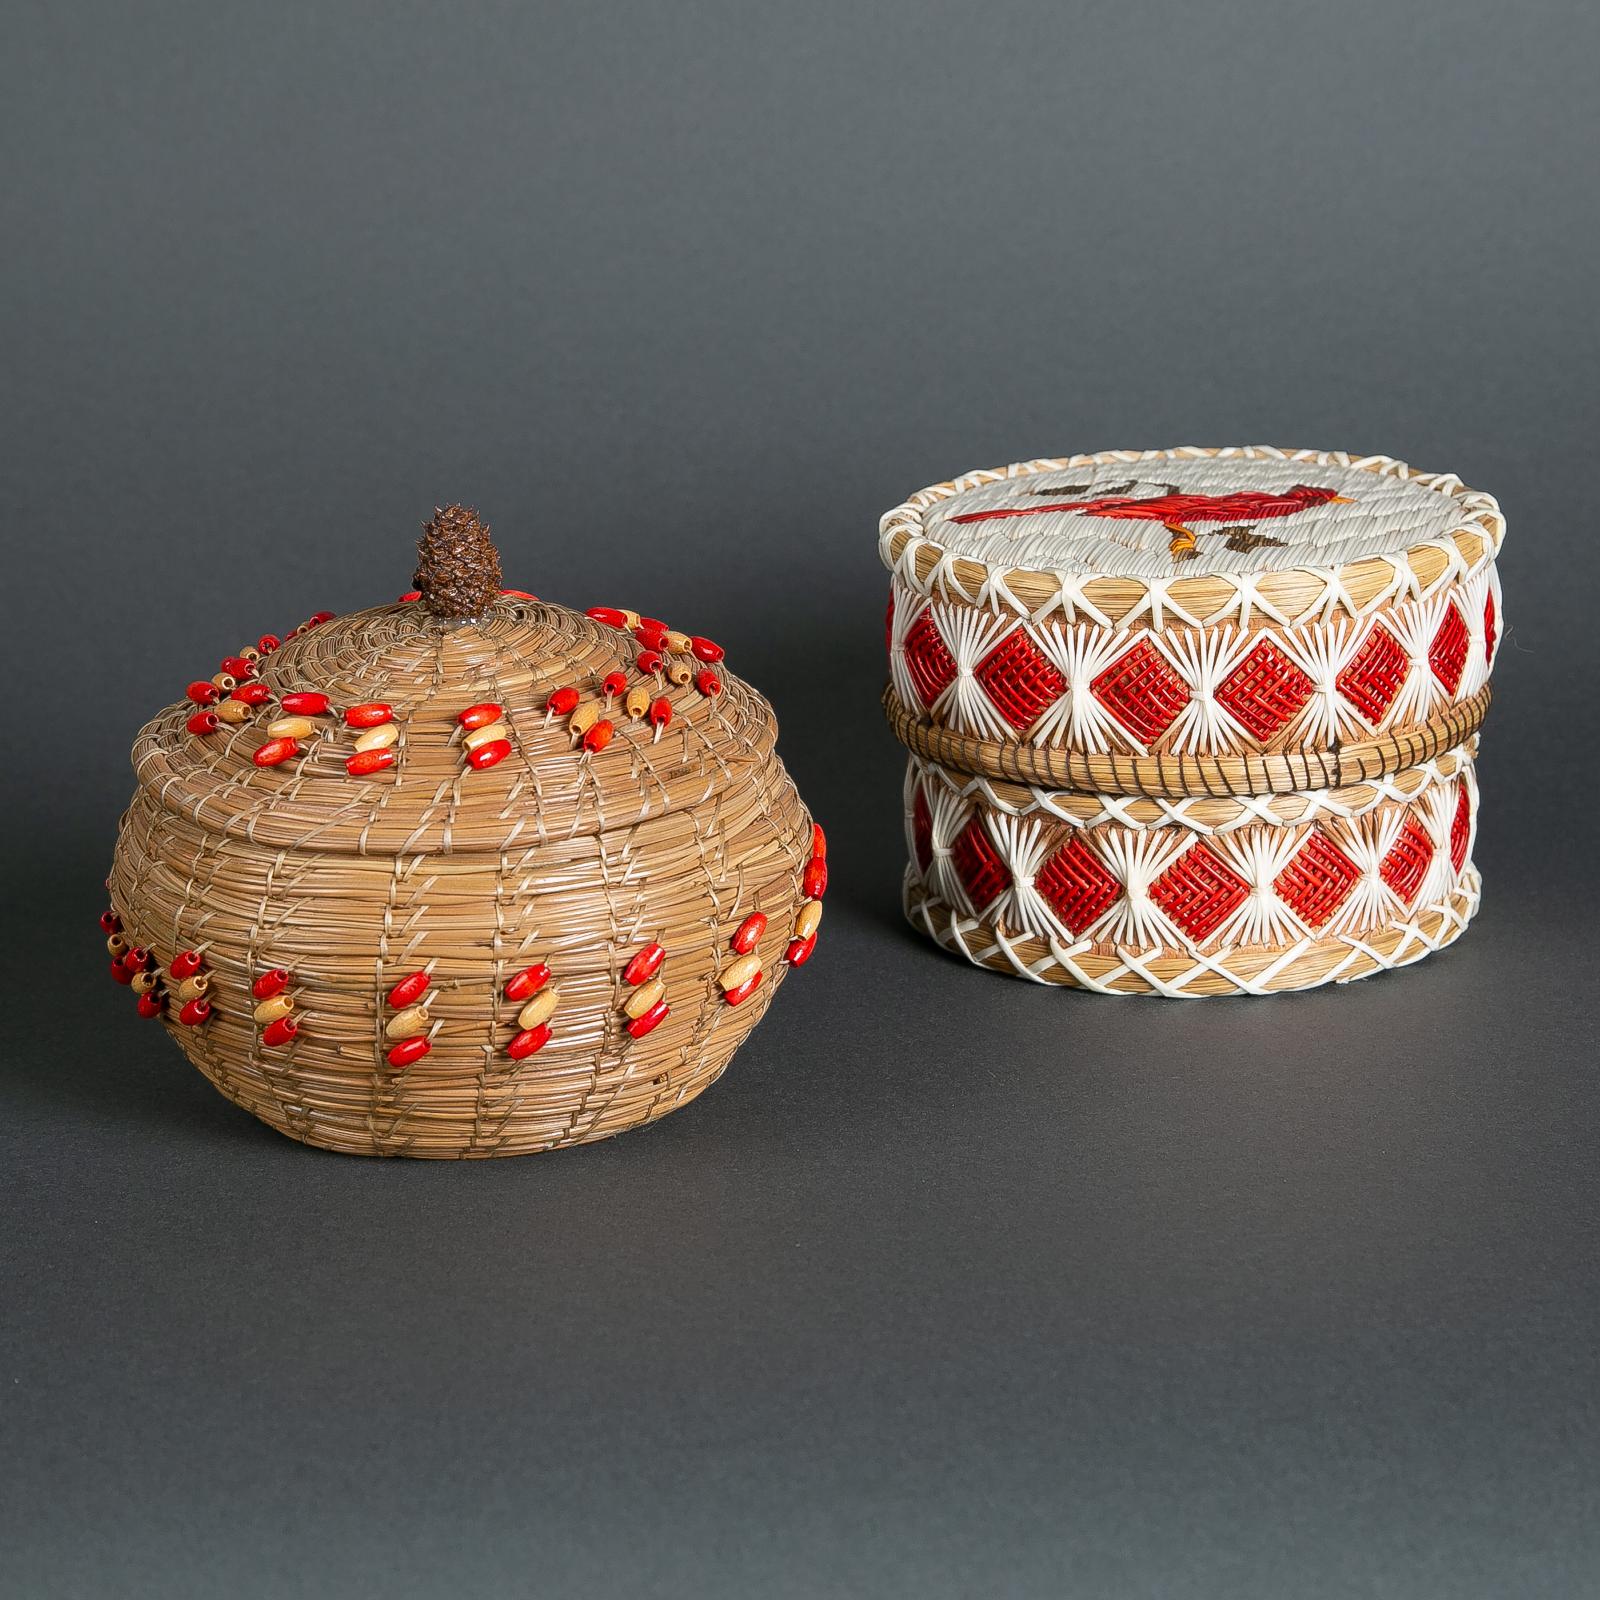 Mary Thomas - Two Woven Lidded Baskets